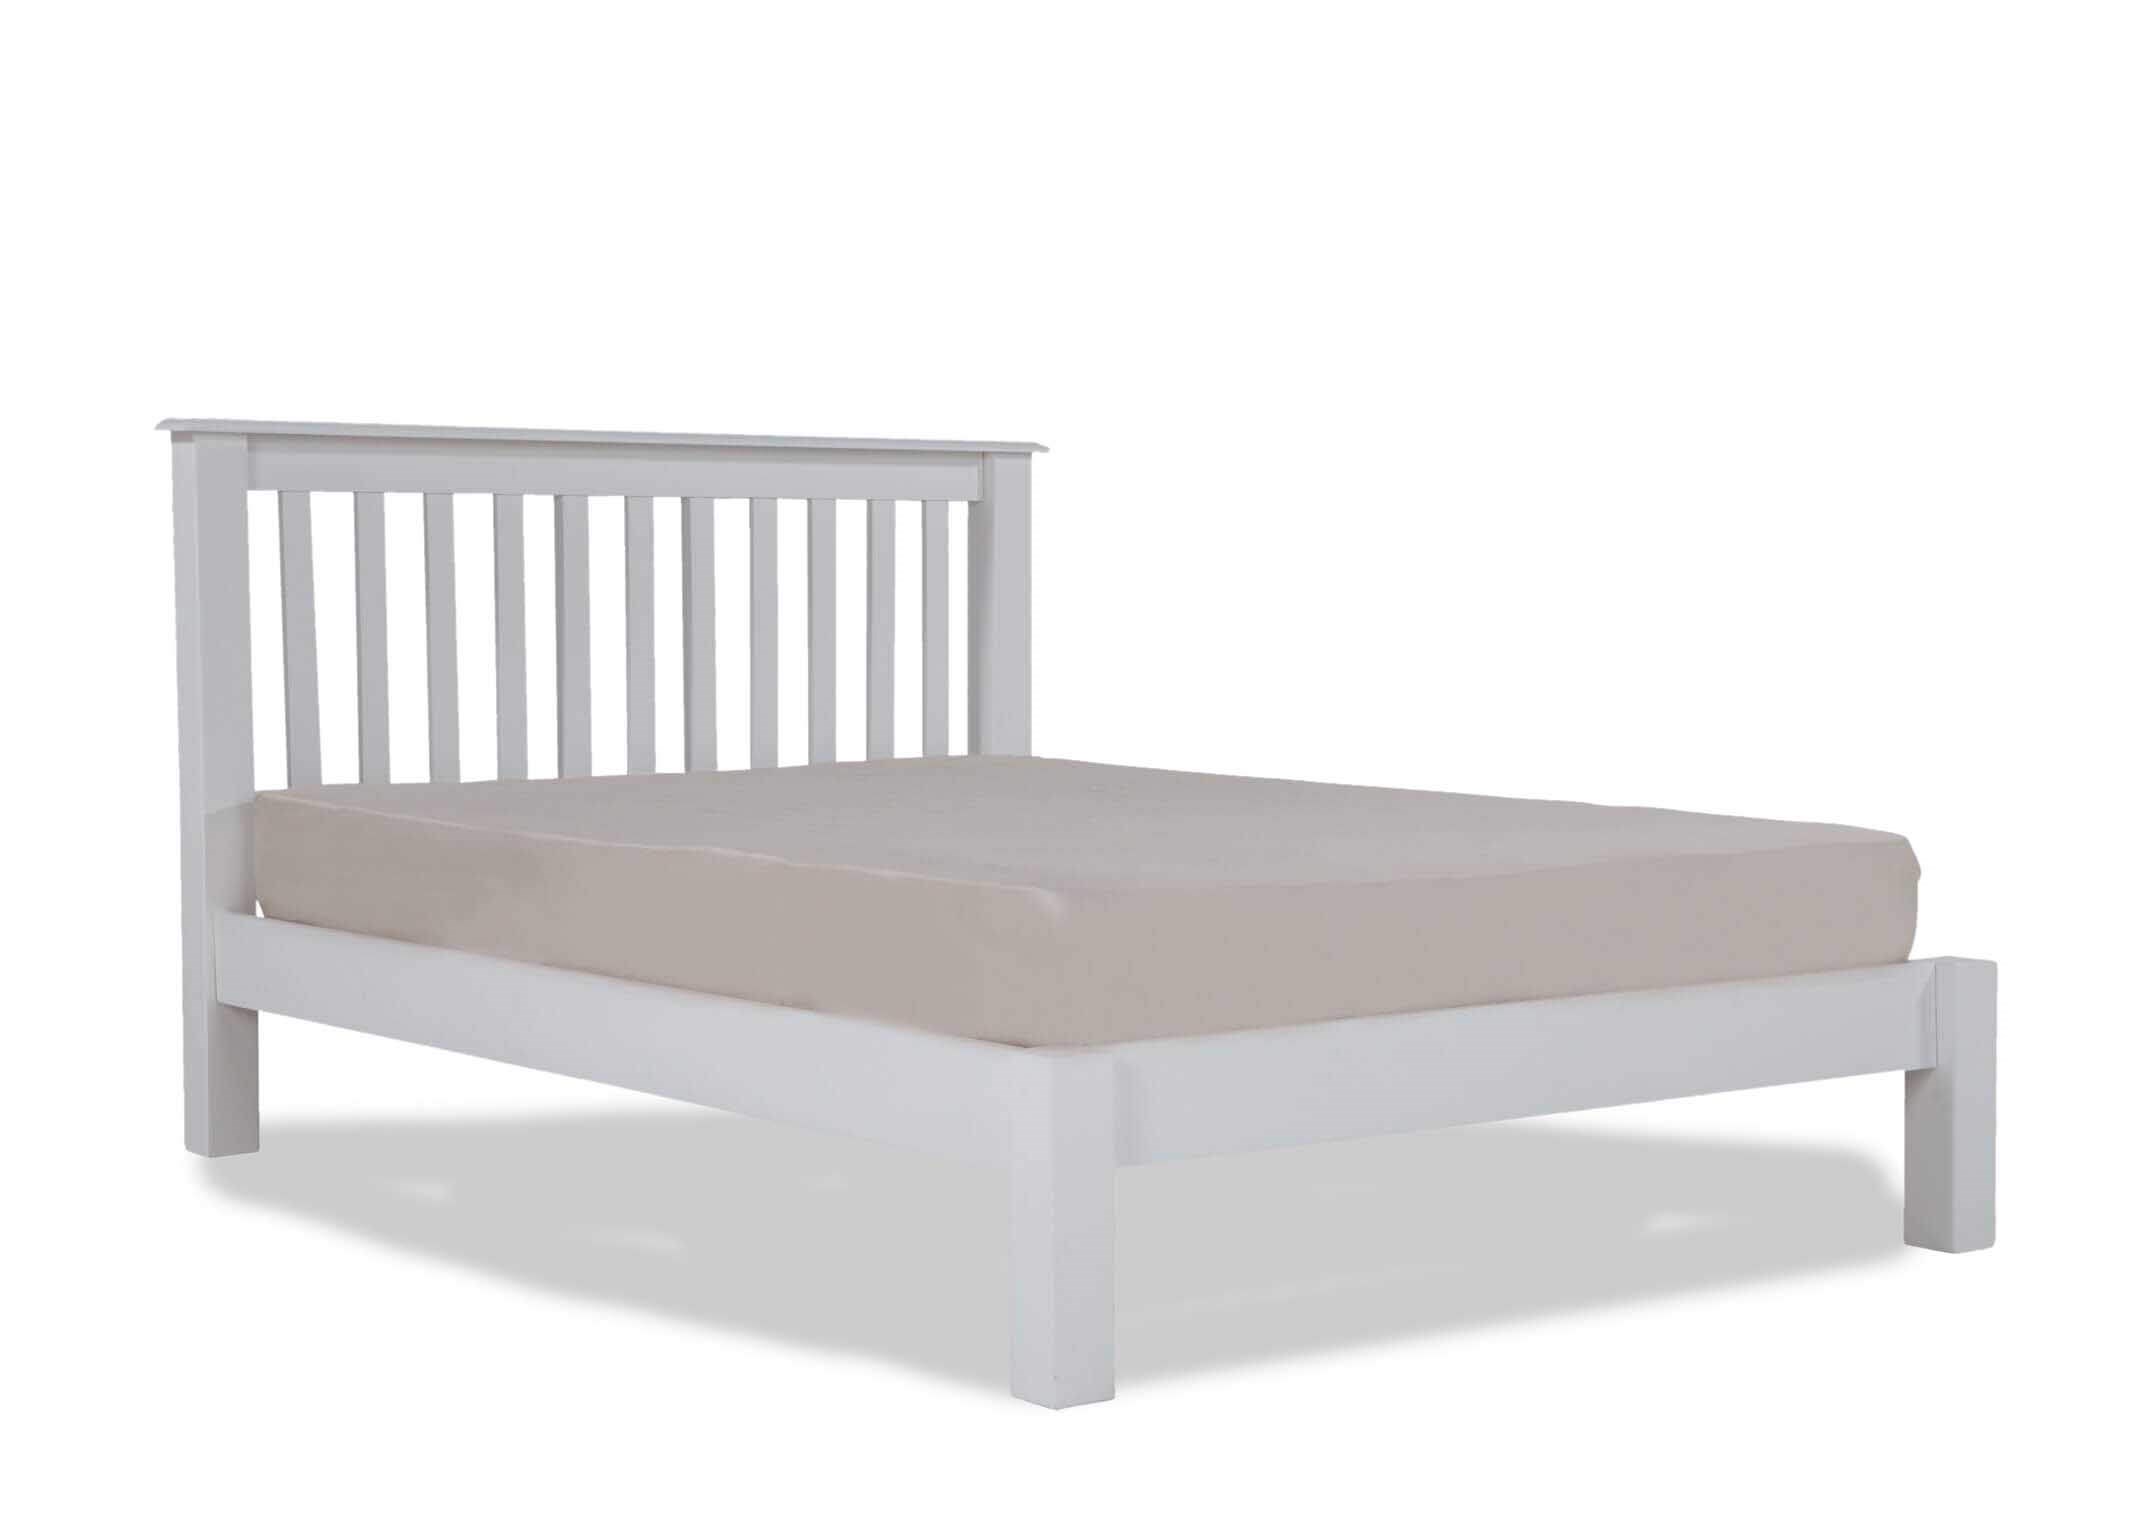 Single 3 Ft White Bed Frame Malmo, 3 Foot Bed Frame